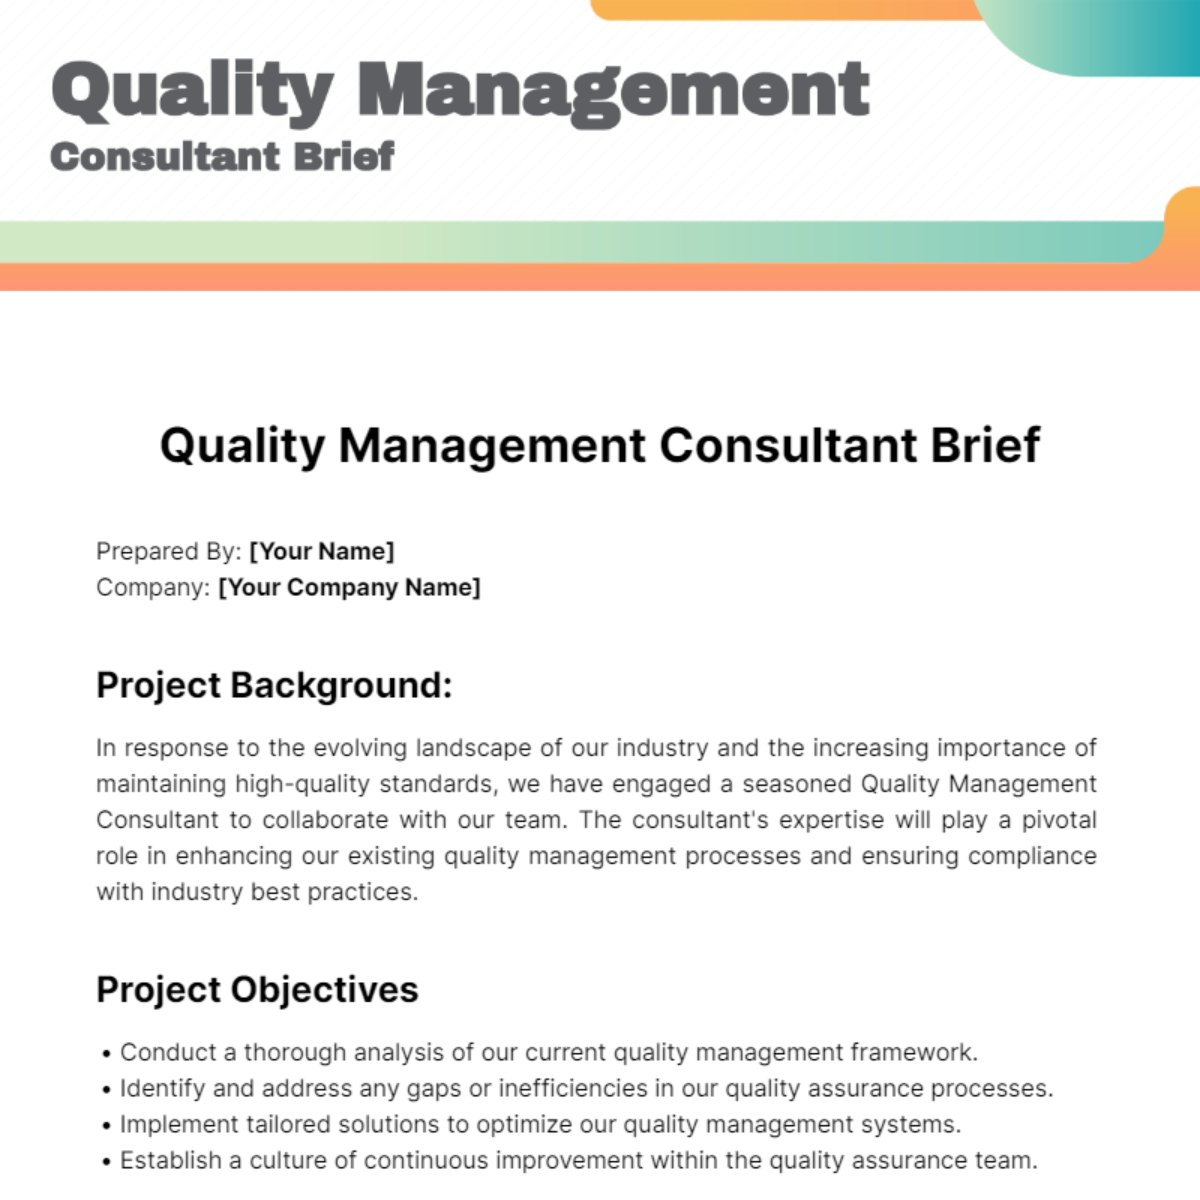 Quality Management Consultant Brief Template